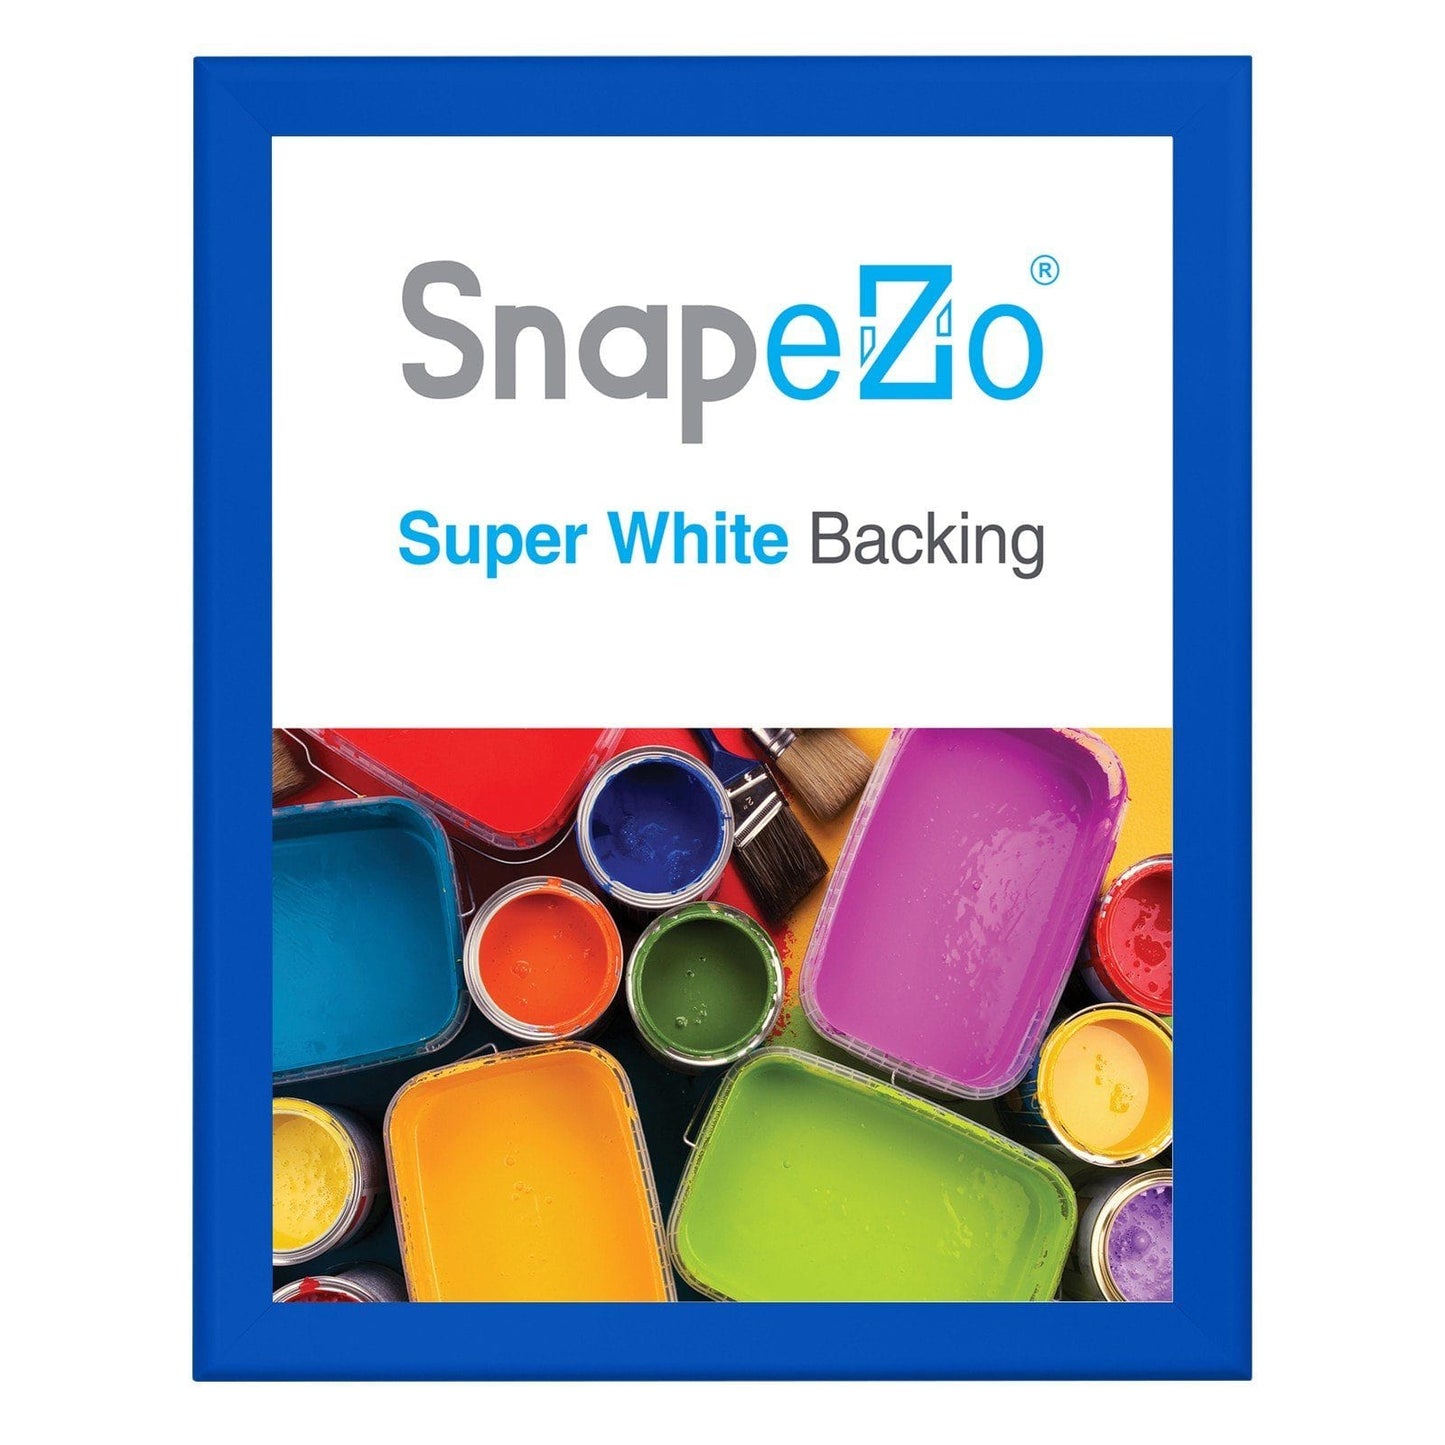 36x48 Blue SnapeZo® Snap Frame - 1.7" Profile - Snap Frames Direct